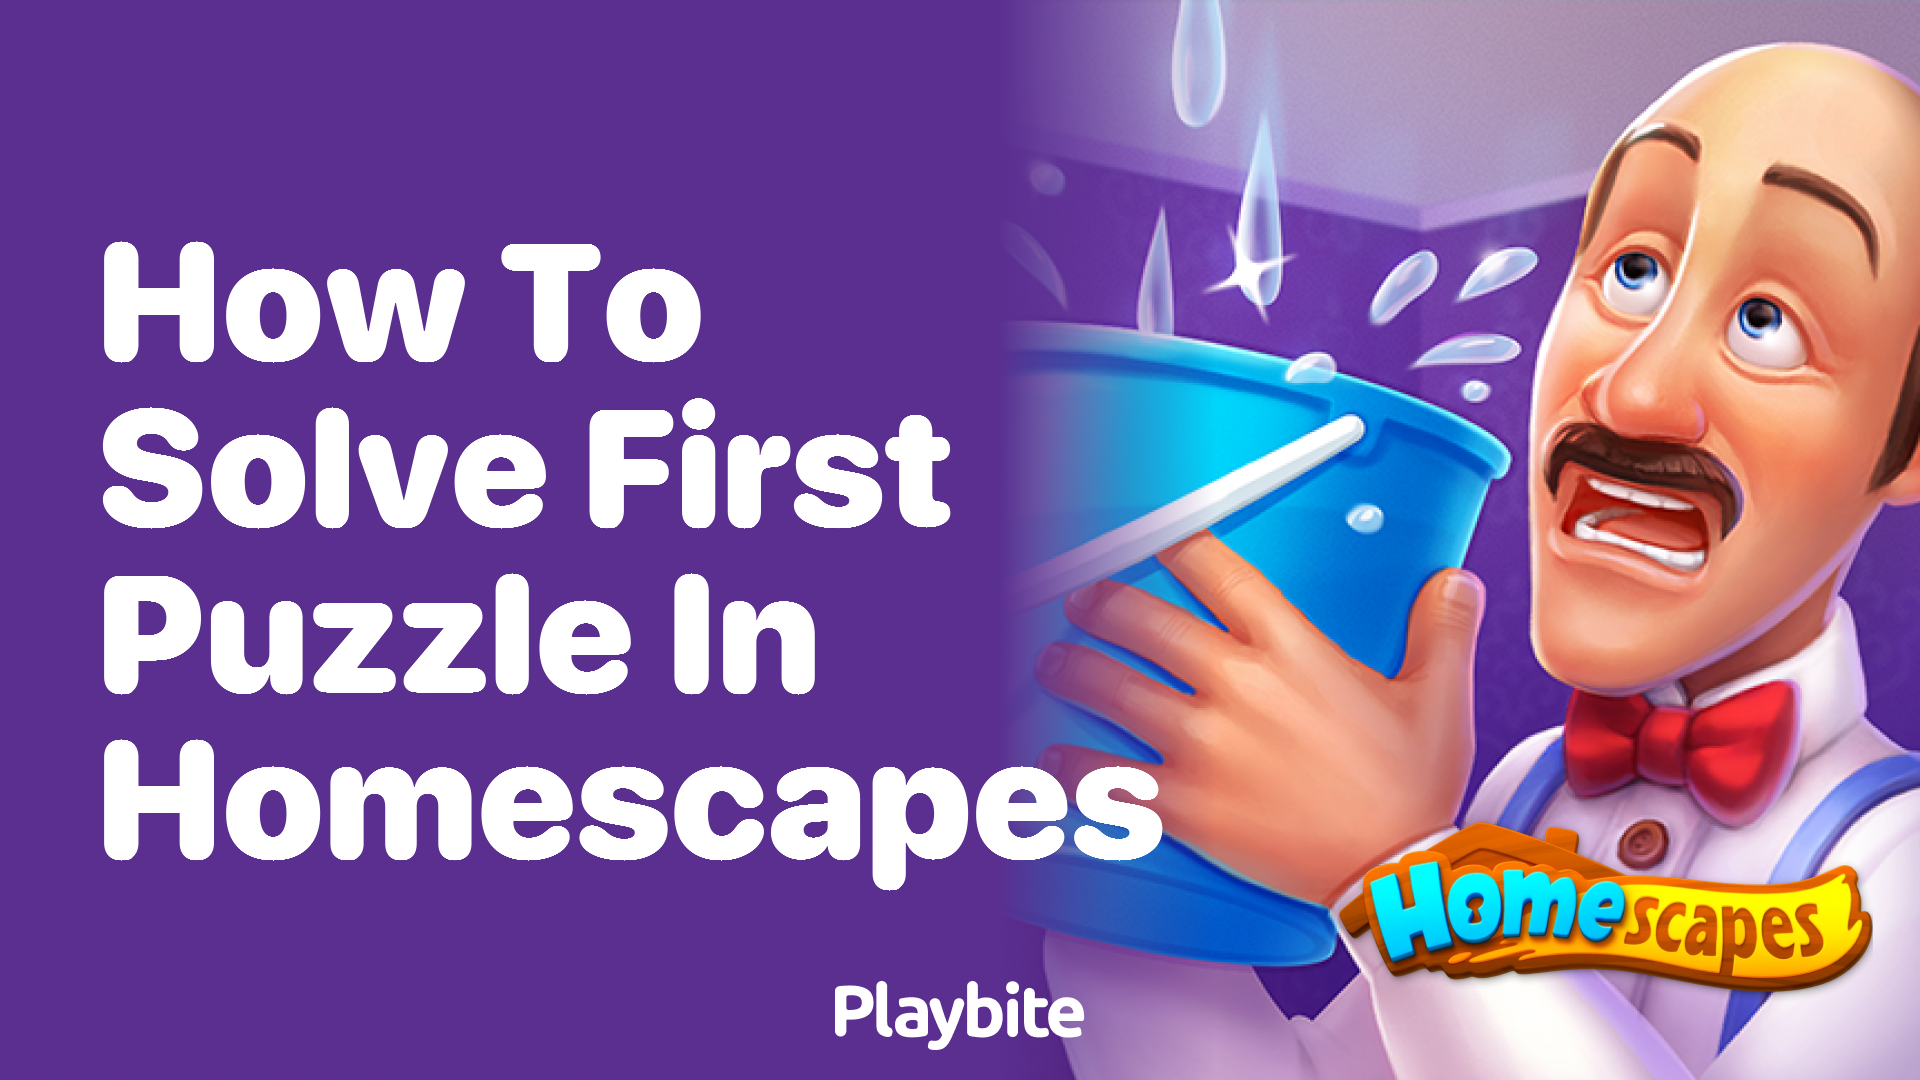 How to Solve the First Puzzle in Homescapes?